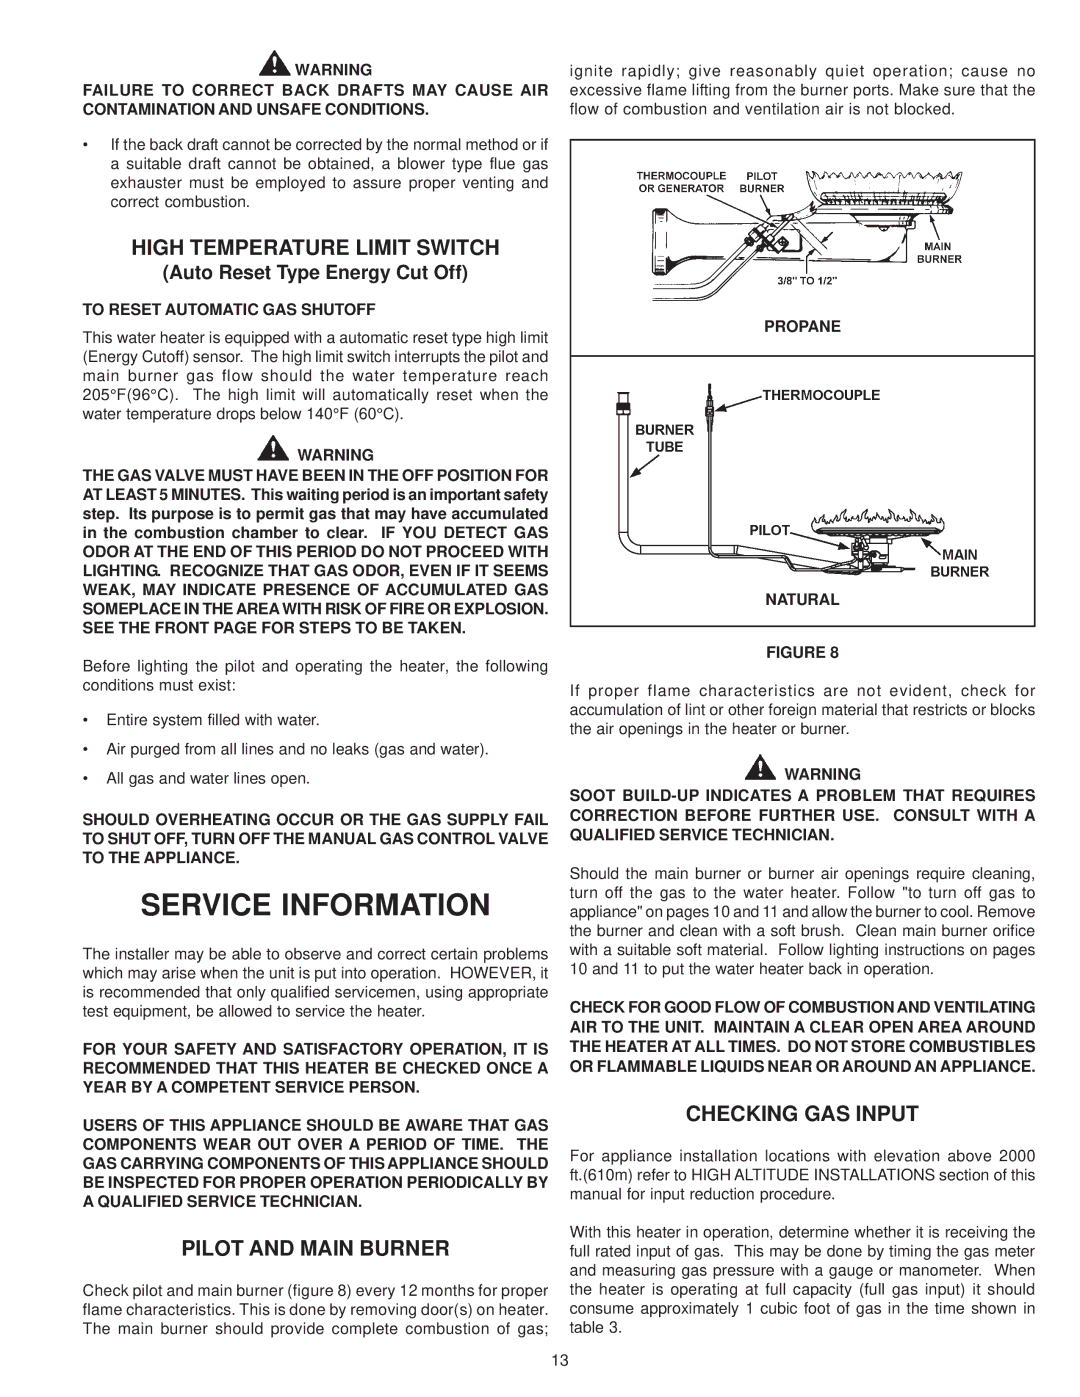 A.O. Smith BT- 80 warranty Service Information, High Temperature Limit Switch, Pilot and Main Burner, Checking GAS Input 